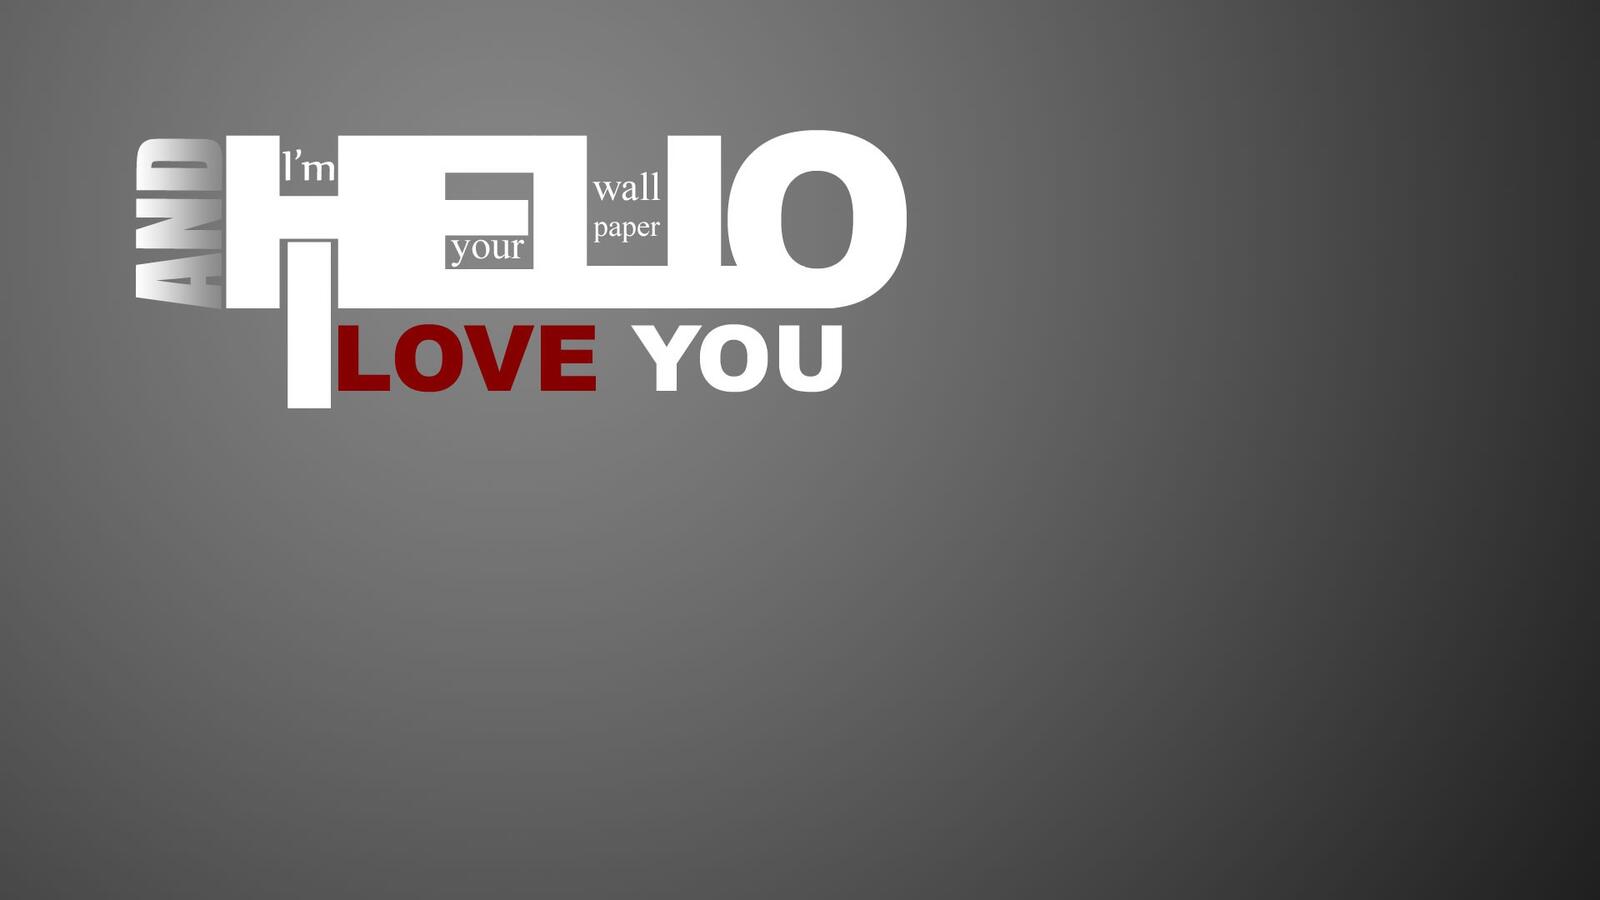 Wallpapers hello i love you and im your wallpaper on the desktop